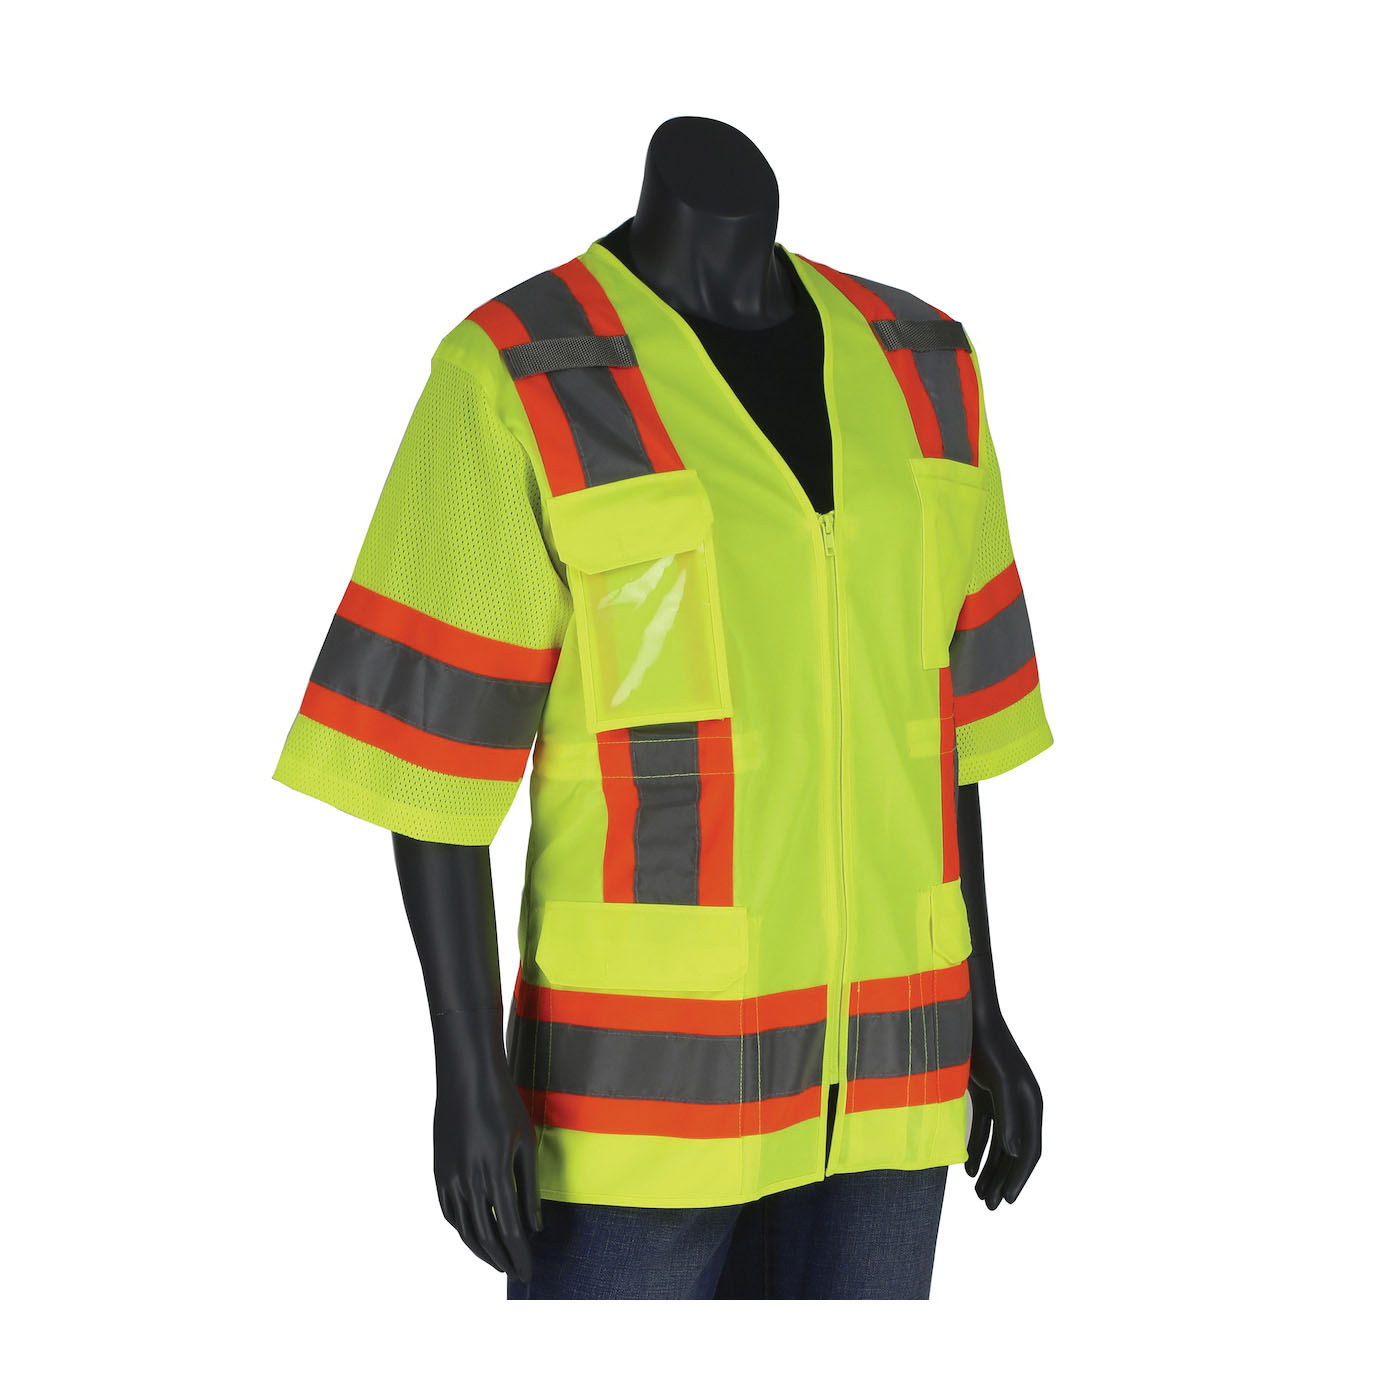 PIP® 303-0513-LY/M 2-Tone Contoured Surveyor's Vest With Solid Front and Mesh Back, M, Hi-Vis Yellow, 100% Polyester Mesh/Solid Tricot Knit, Zipper Closure, 11 Pockets, ANSI Class: Type/Class R3